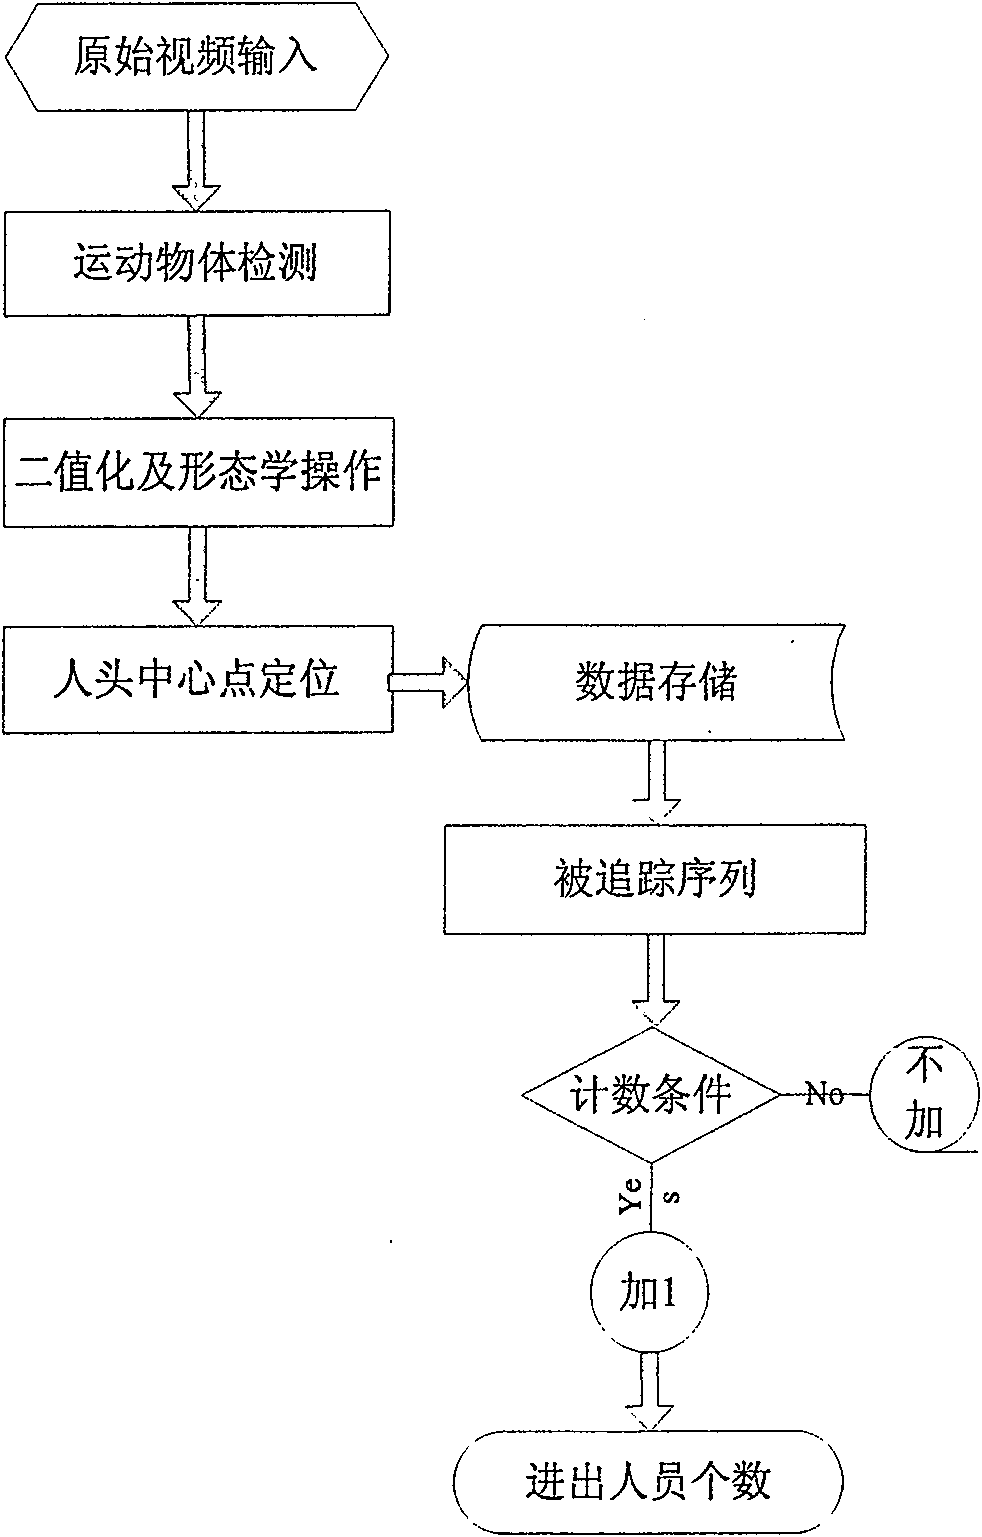 Automatic monitoring method for miner entry and exit of coal mine